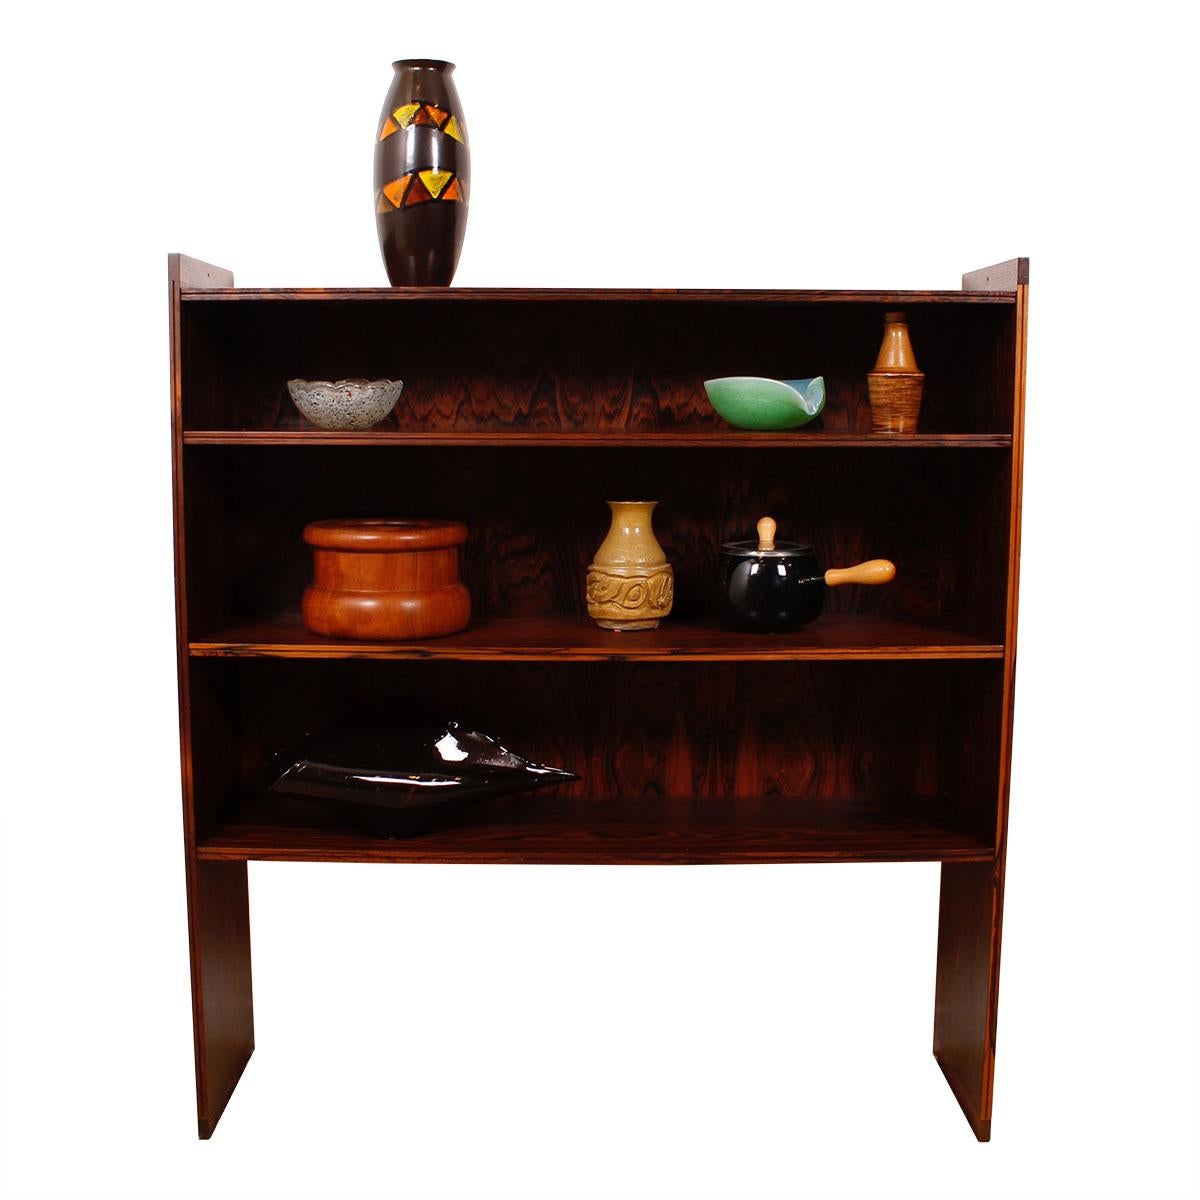 Royal Danish Embassy Slender-Edged Bookcase by Grete Jalk in Brazilian Rosewood For Sale 2